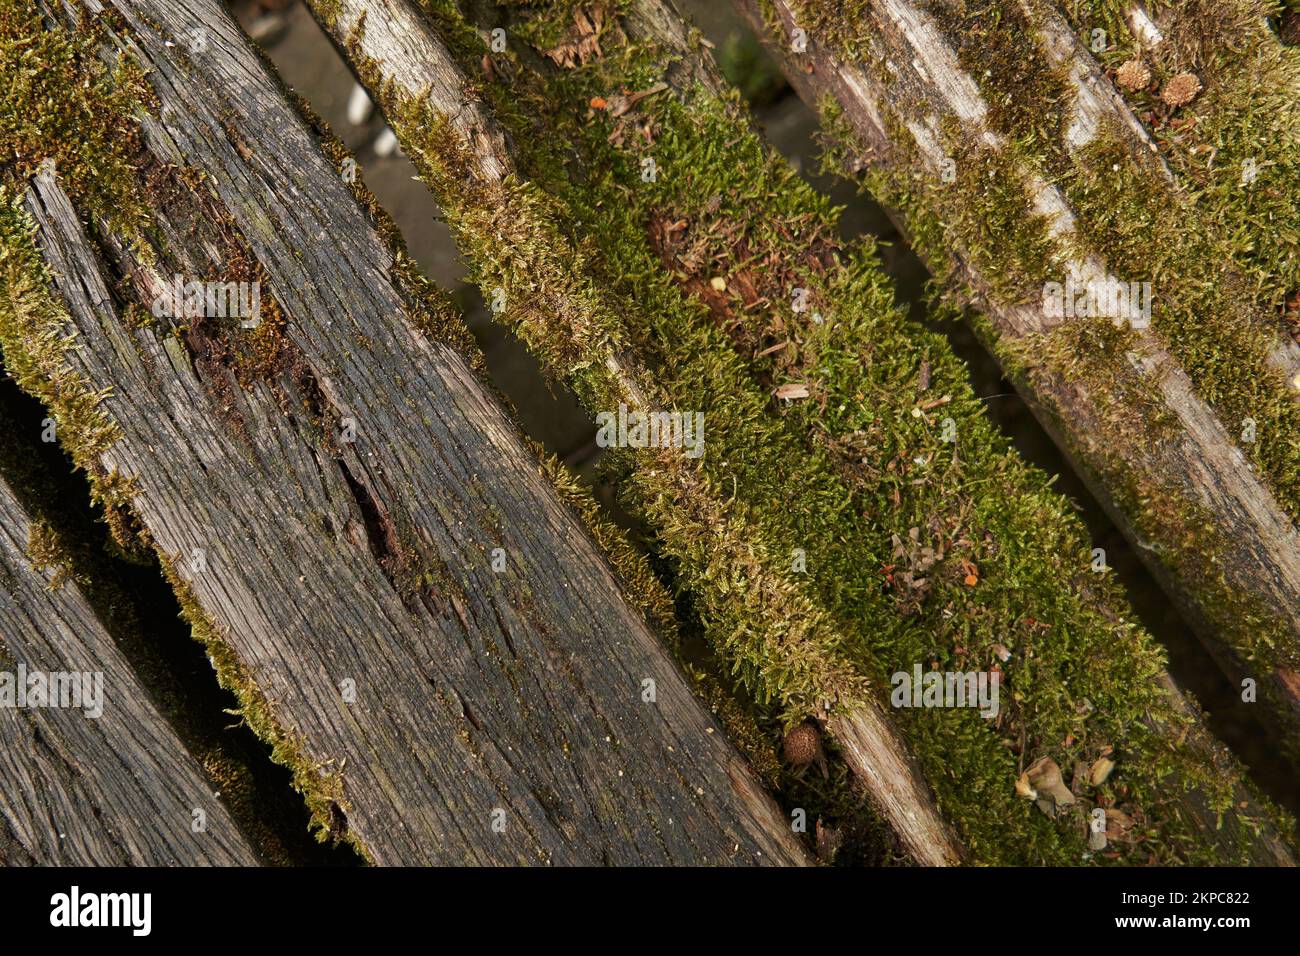 A closeup of a wooden dock covered in moss Stock Photo